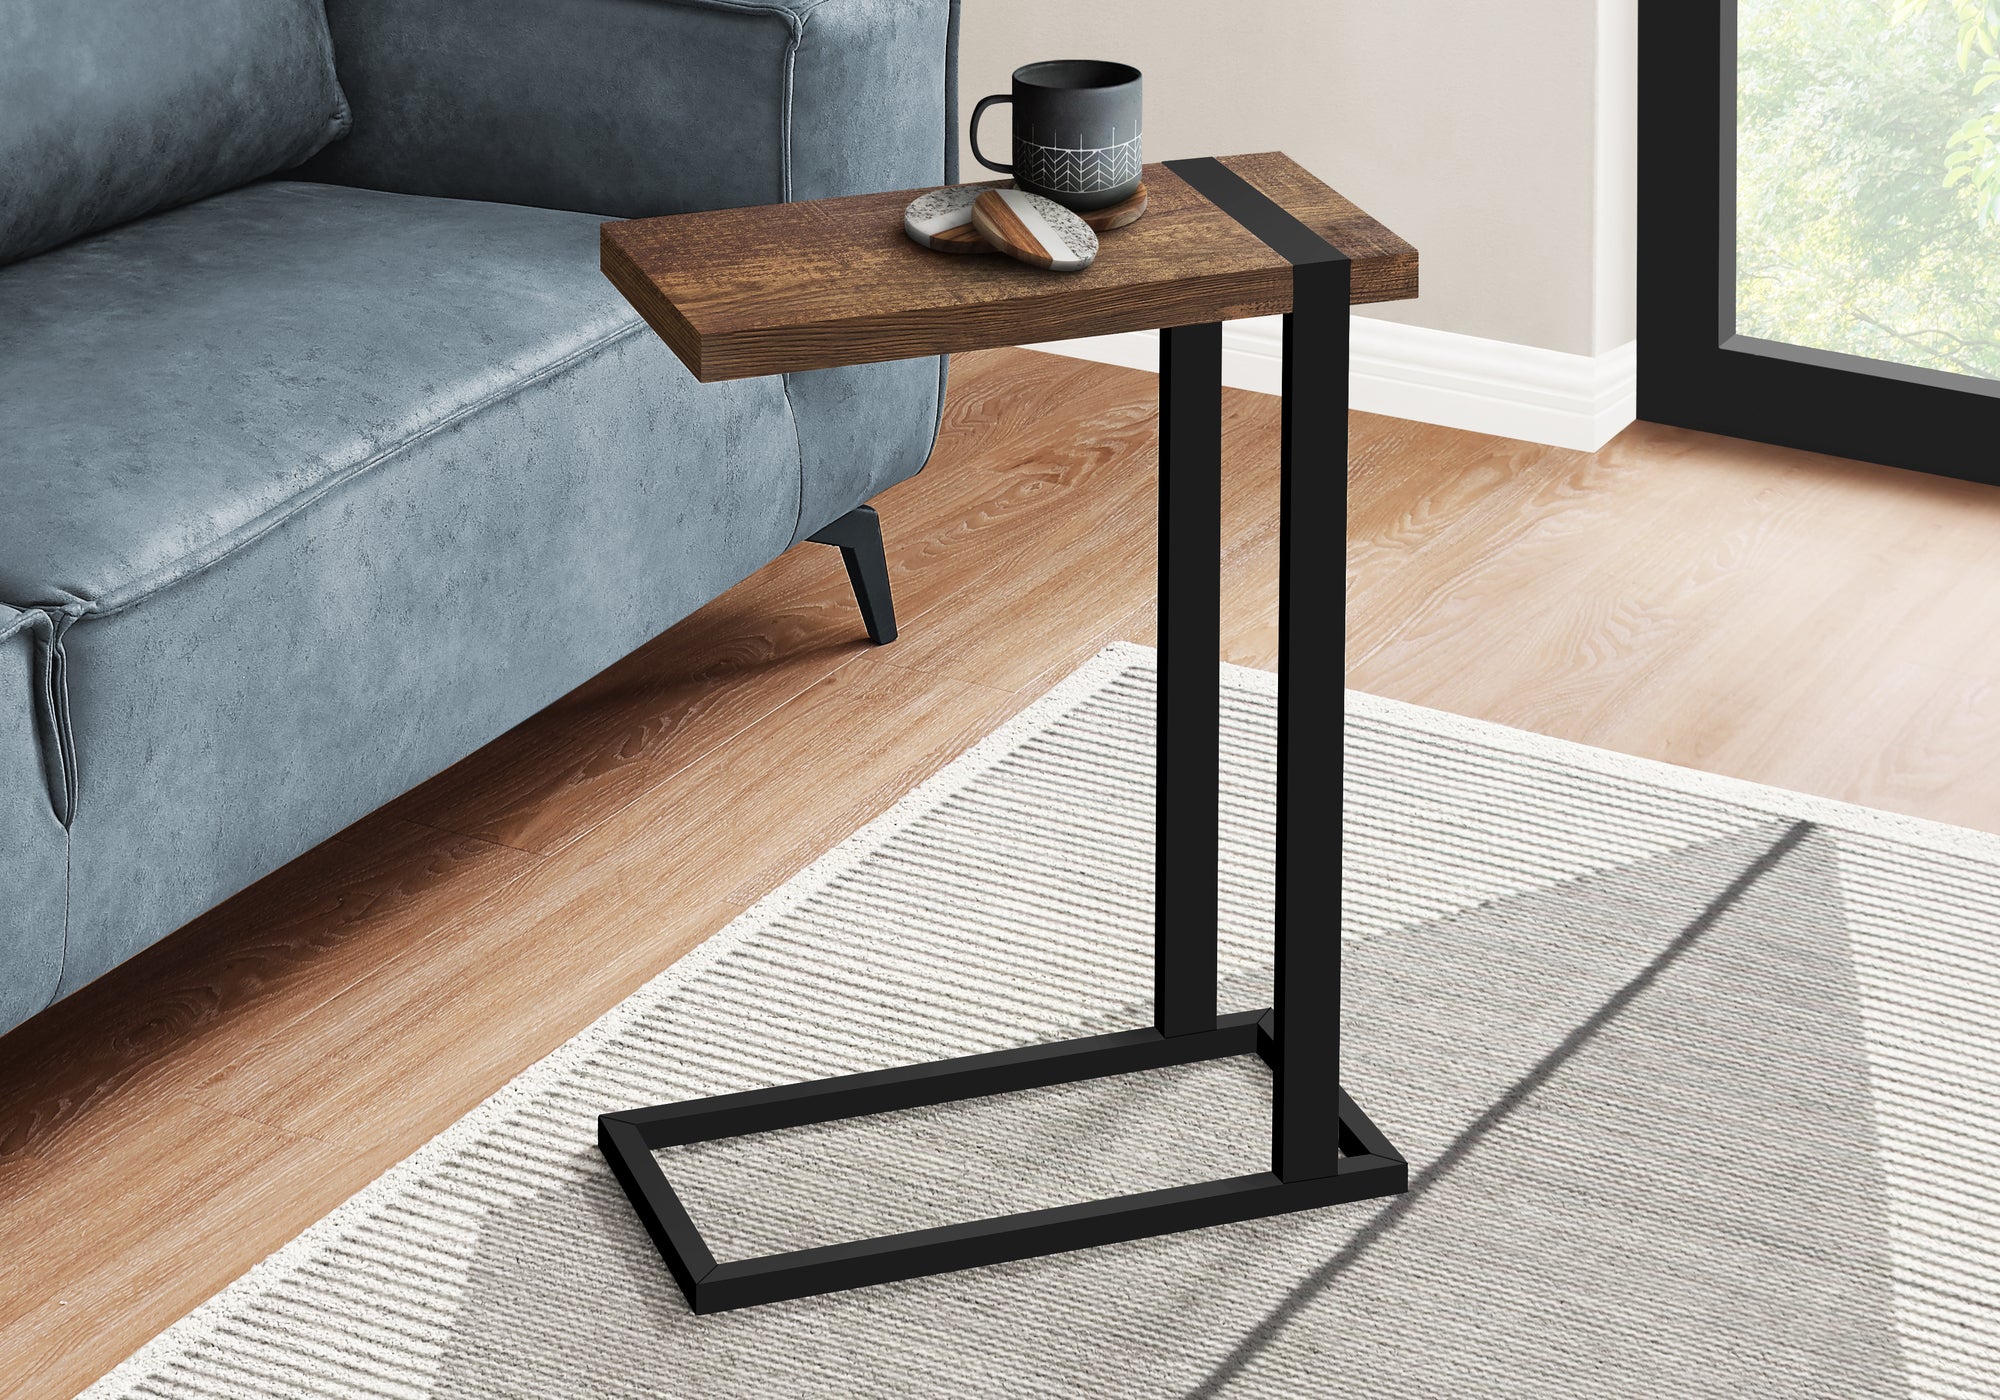 MN-582853    Accent Table, C-Shaped, End, Side, Snack, Living Room, Bedroom, Metal Legs, Laminate, Brown Reclaimed Wood Look, Black, Contemporary, Industrial, Modern